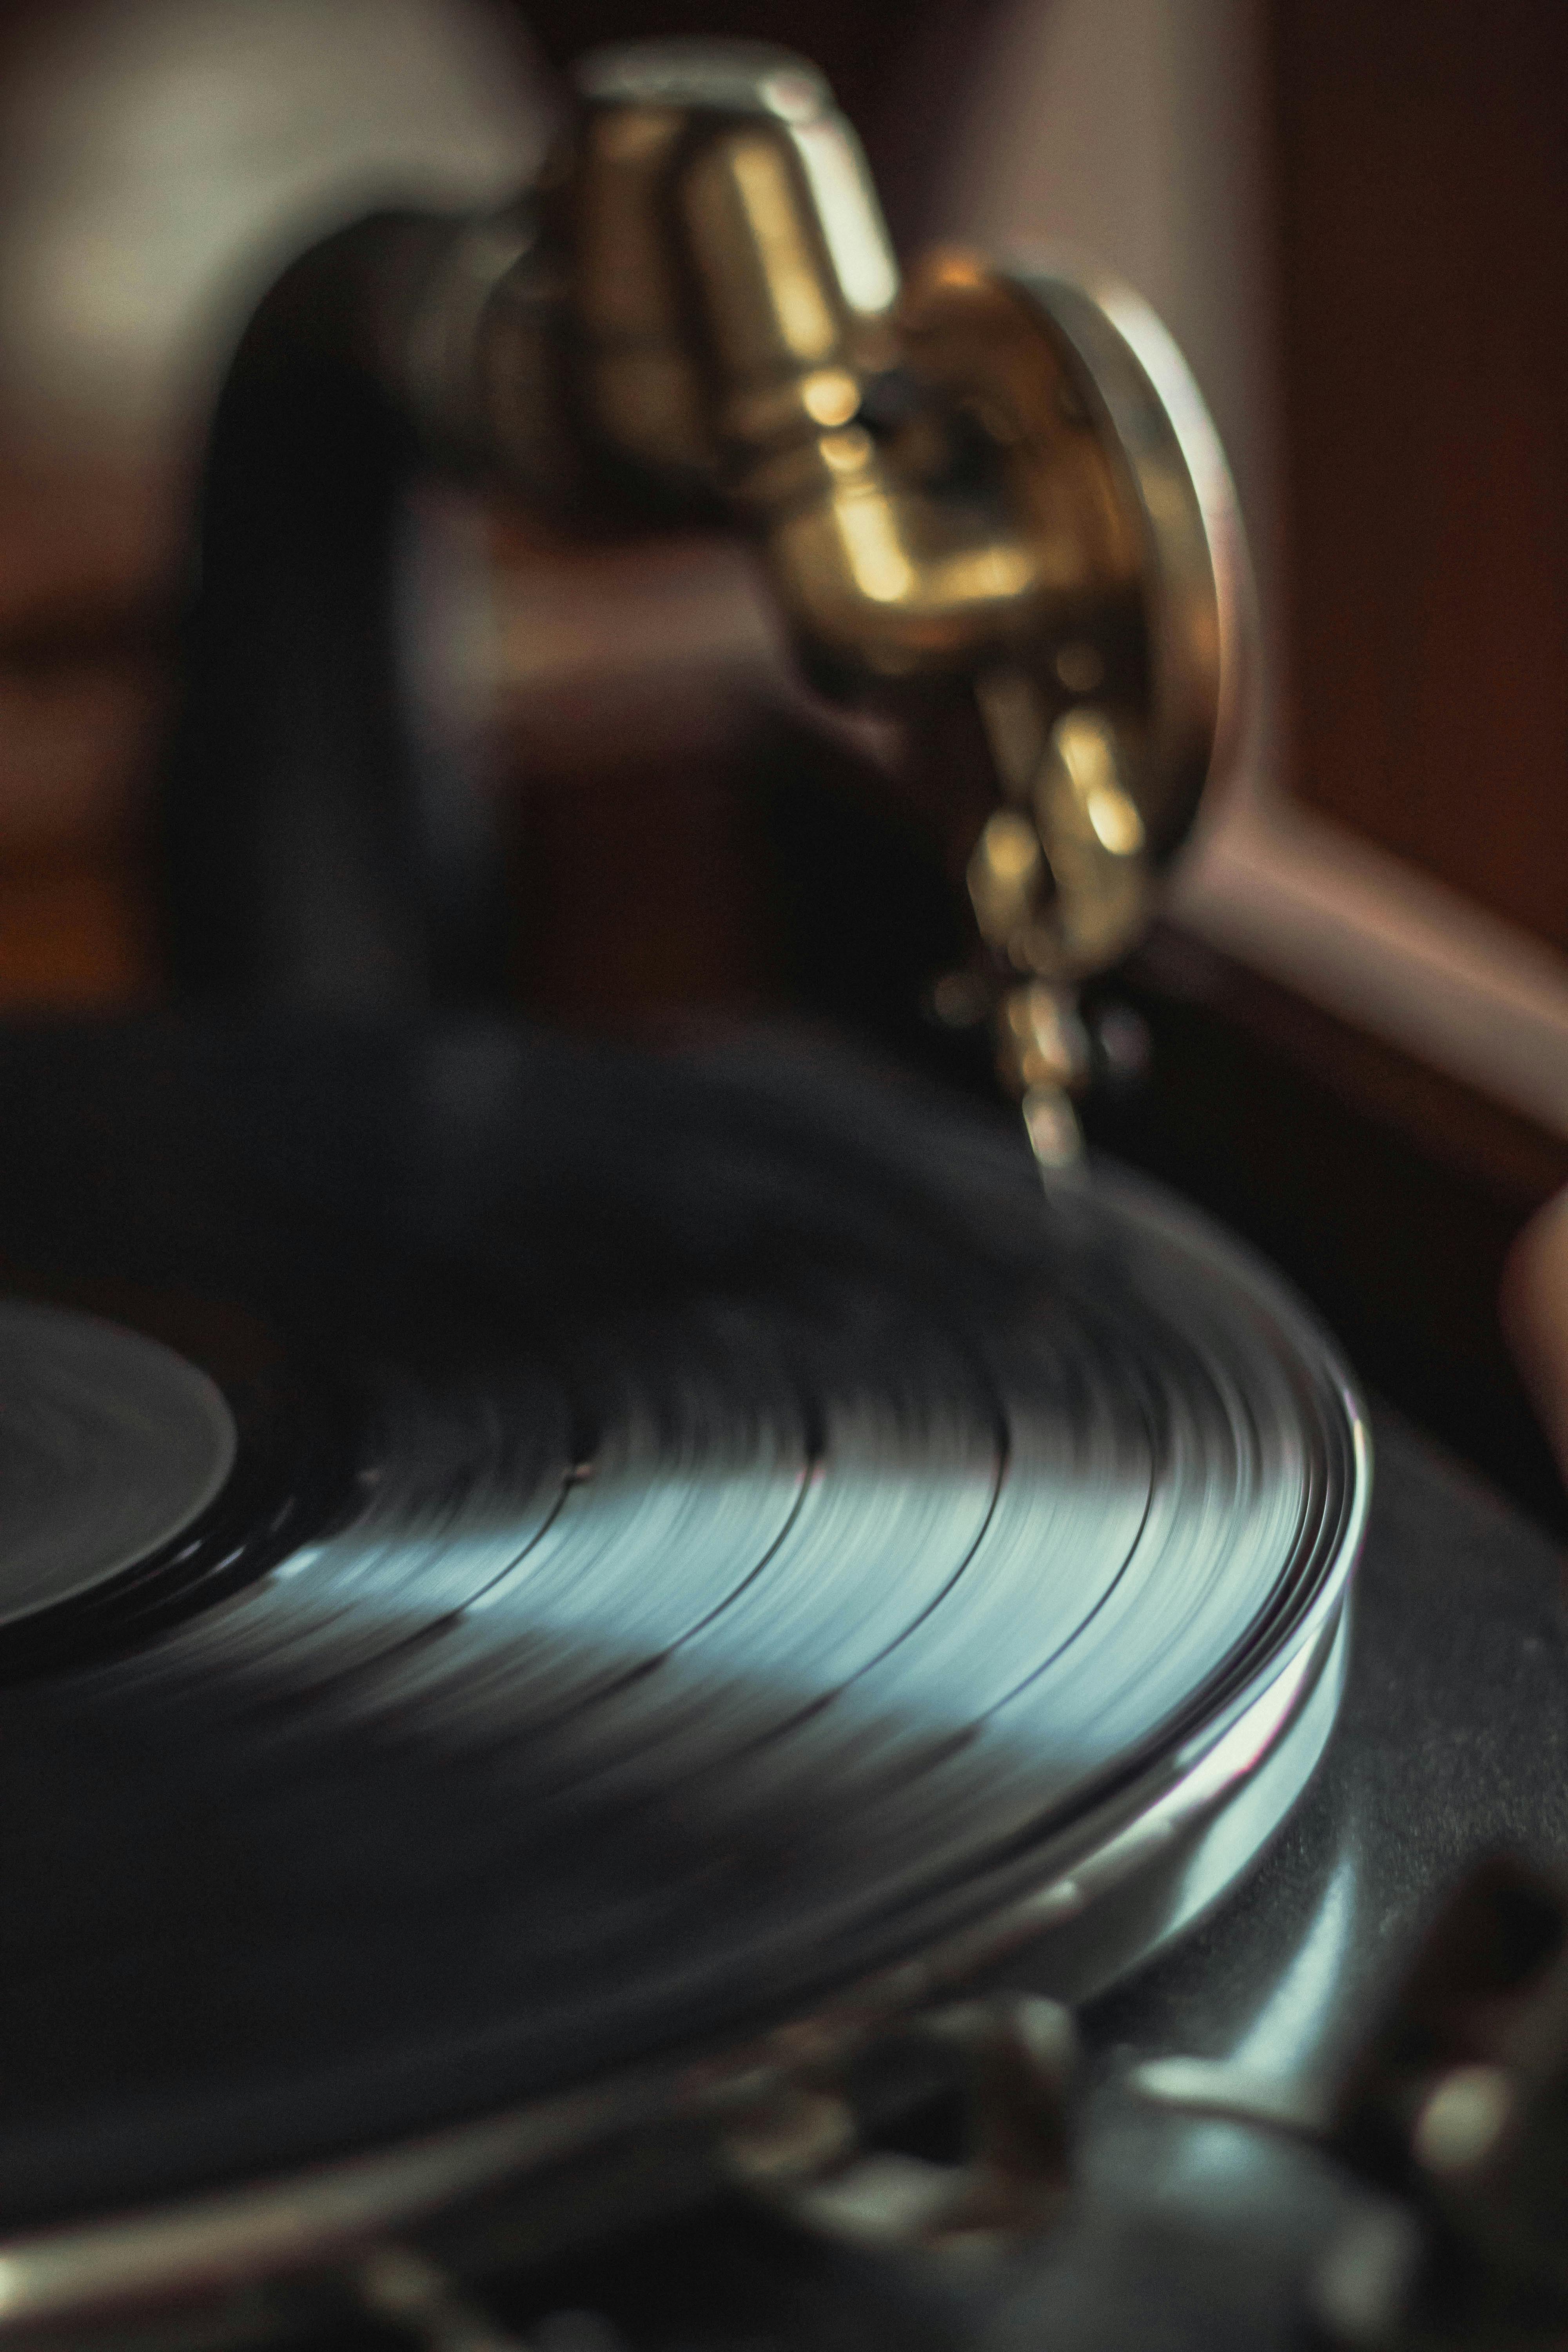 Download wallpapers gramophone, vinyl records, old music player, retro  things, music for desktop free. Pictures for desktop free | Music wallpaper,  Music notes background, Music players